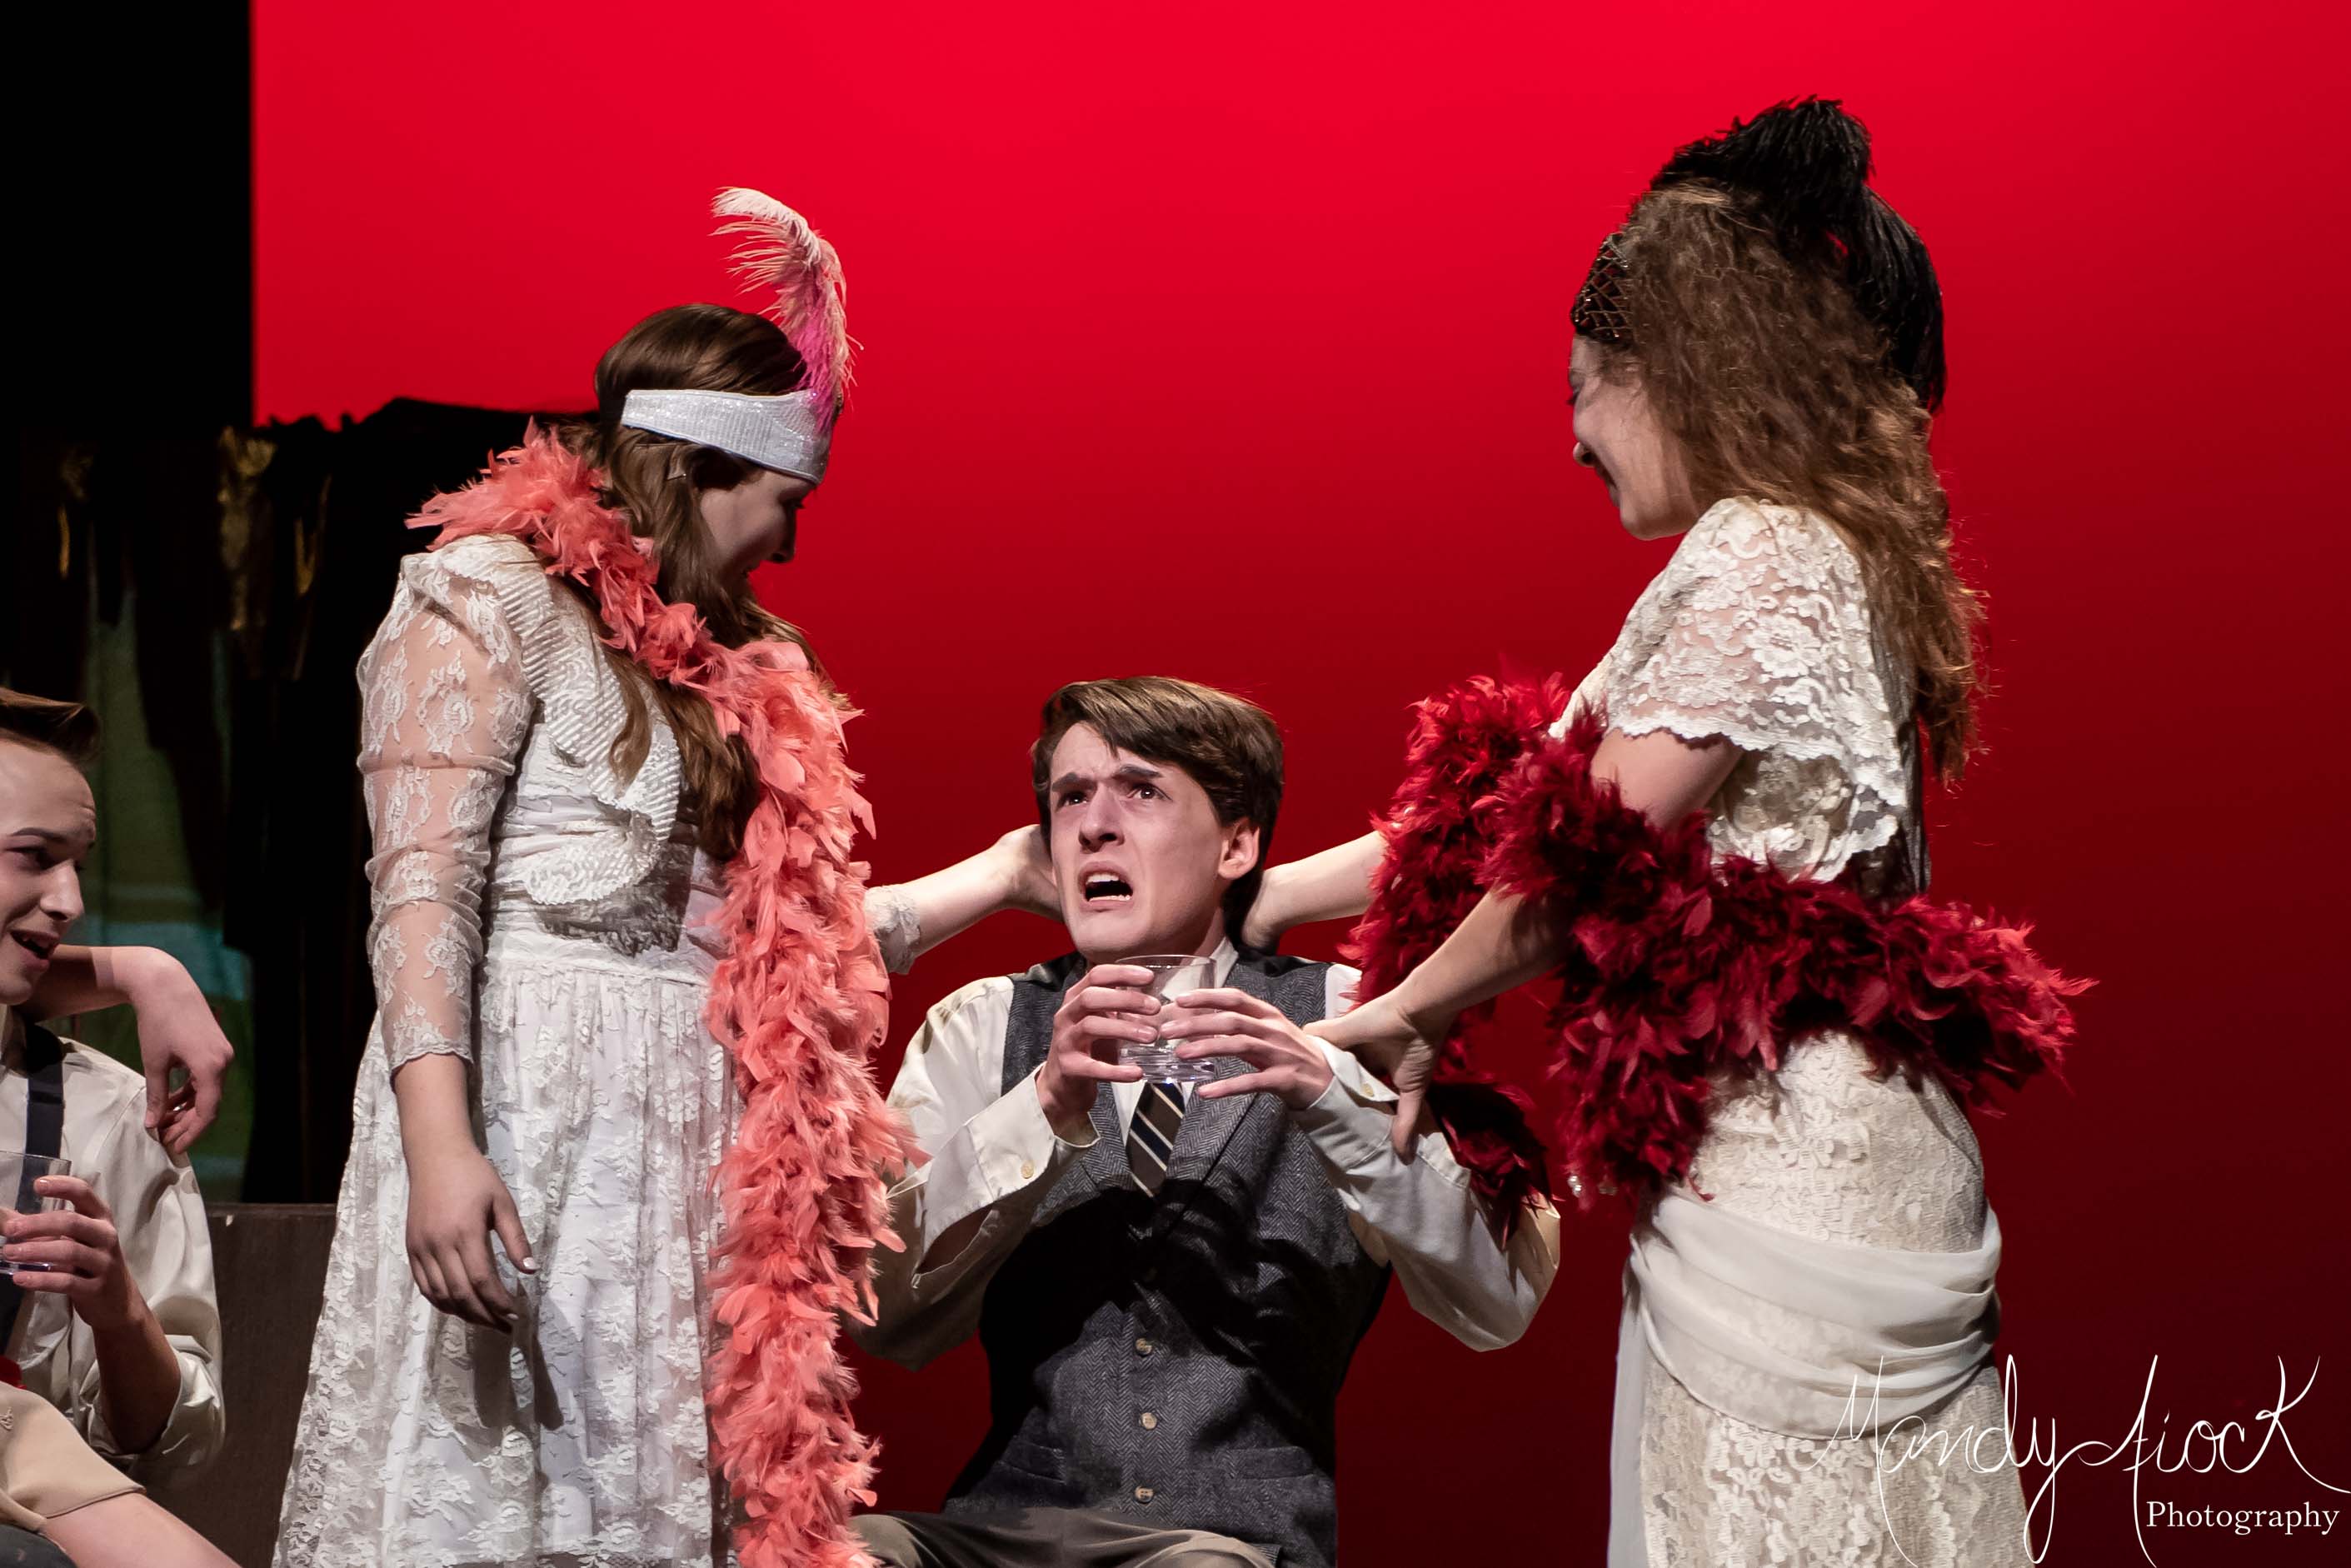 Photos from SSHS Theatre’s 2019 UIL One Act Play, JULES VERNE EATS A RHINOCEROS, by Mandy Fiock Photography!